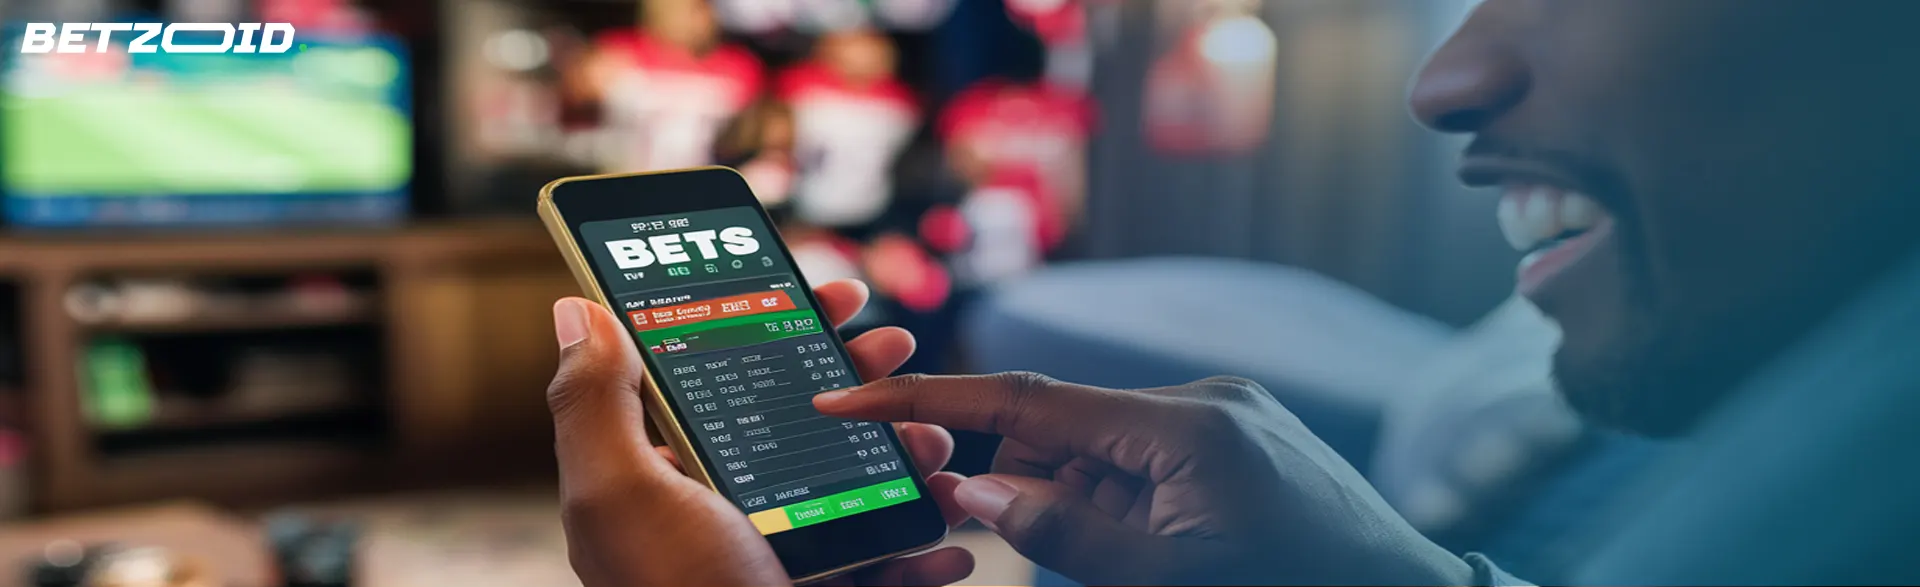 Sports bettig sites that accept Appple Pay.